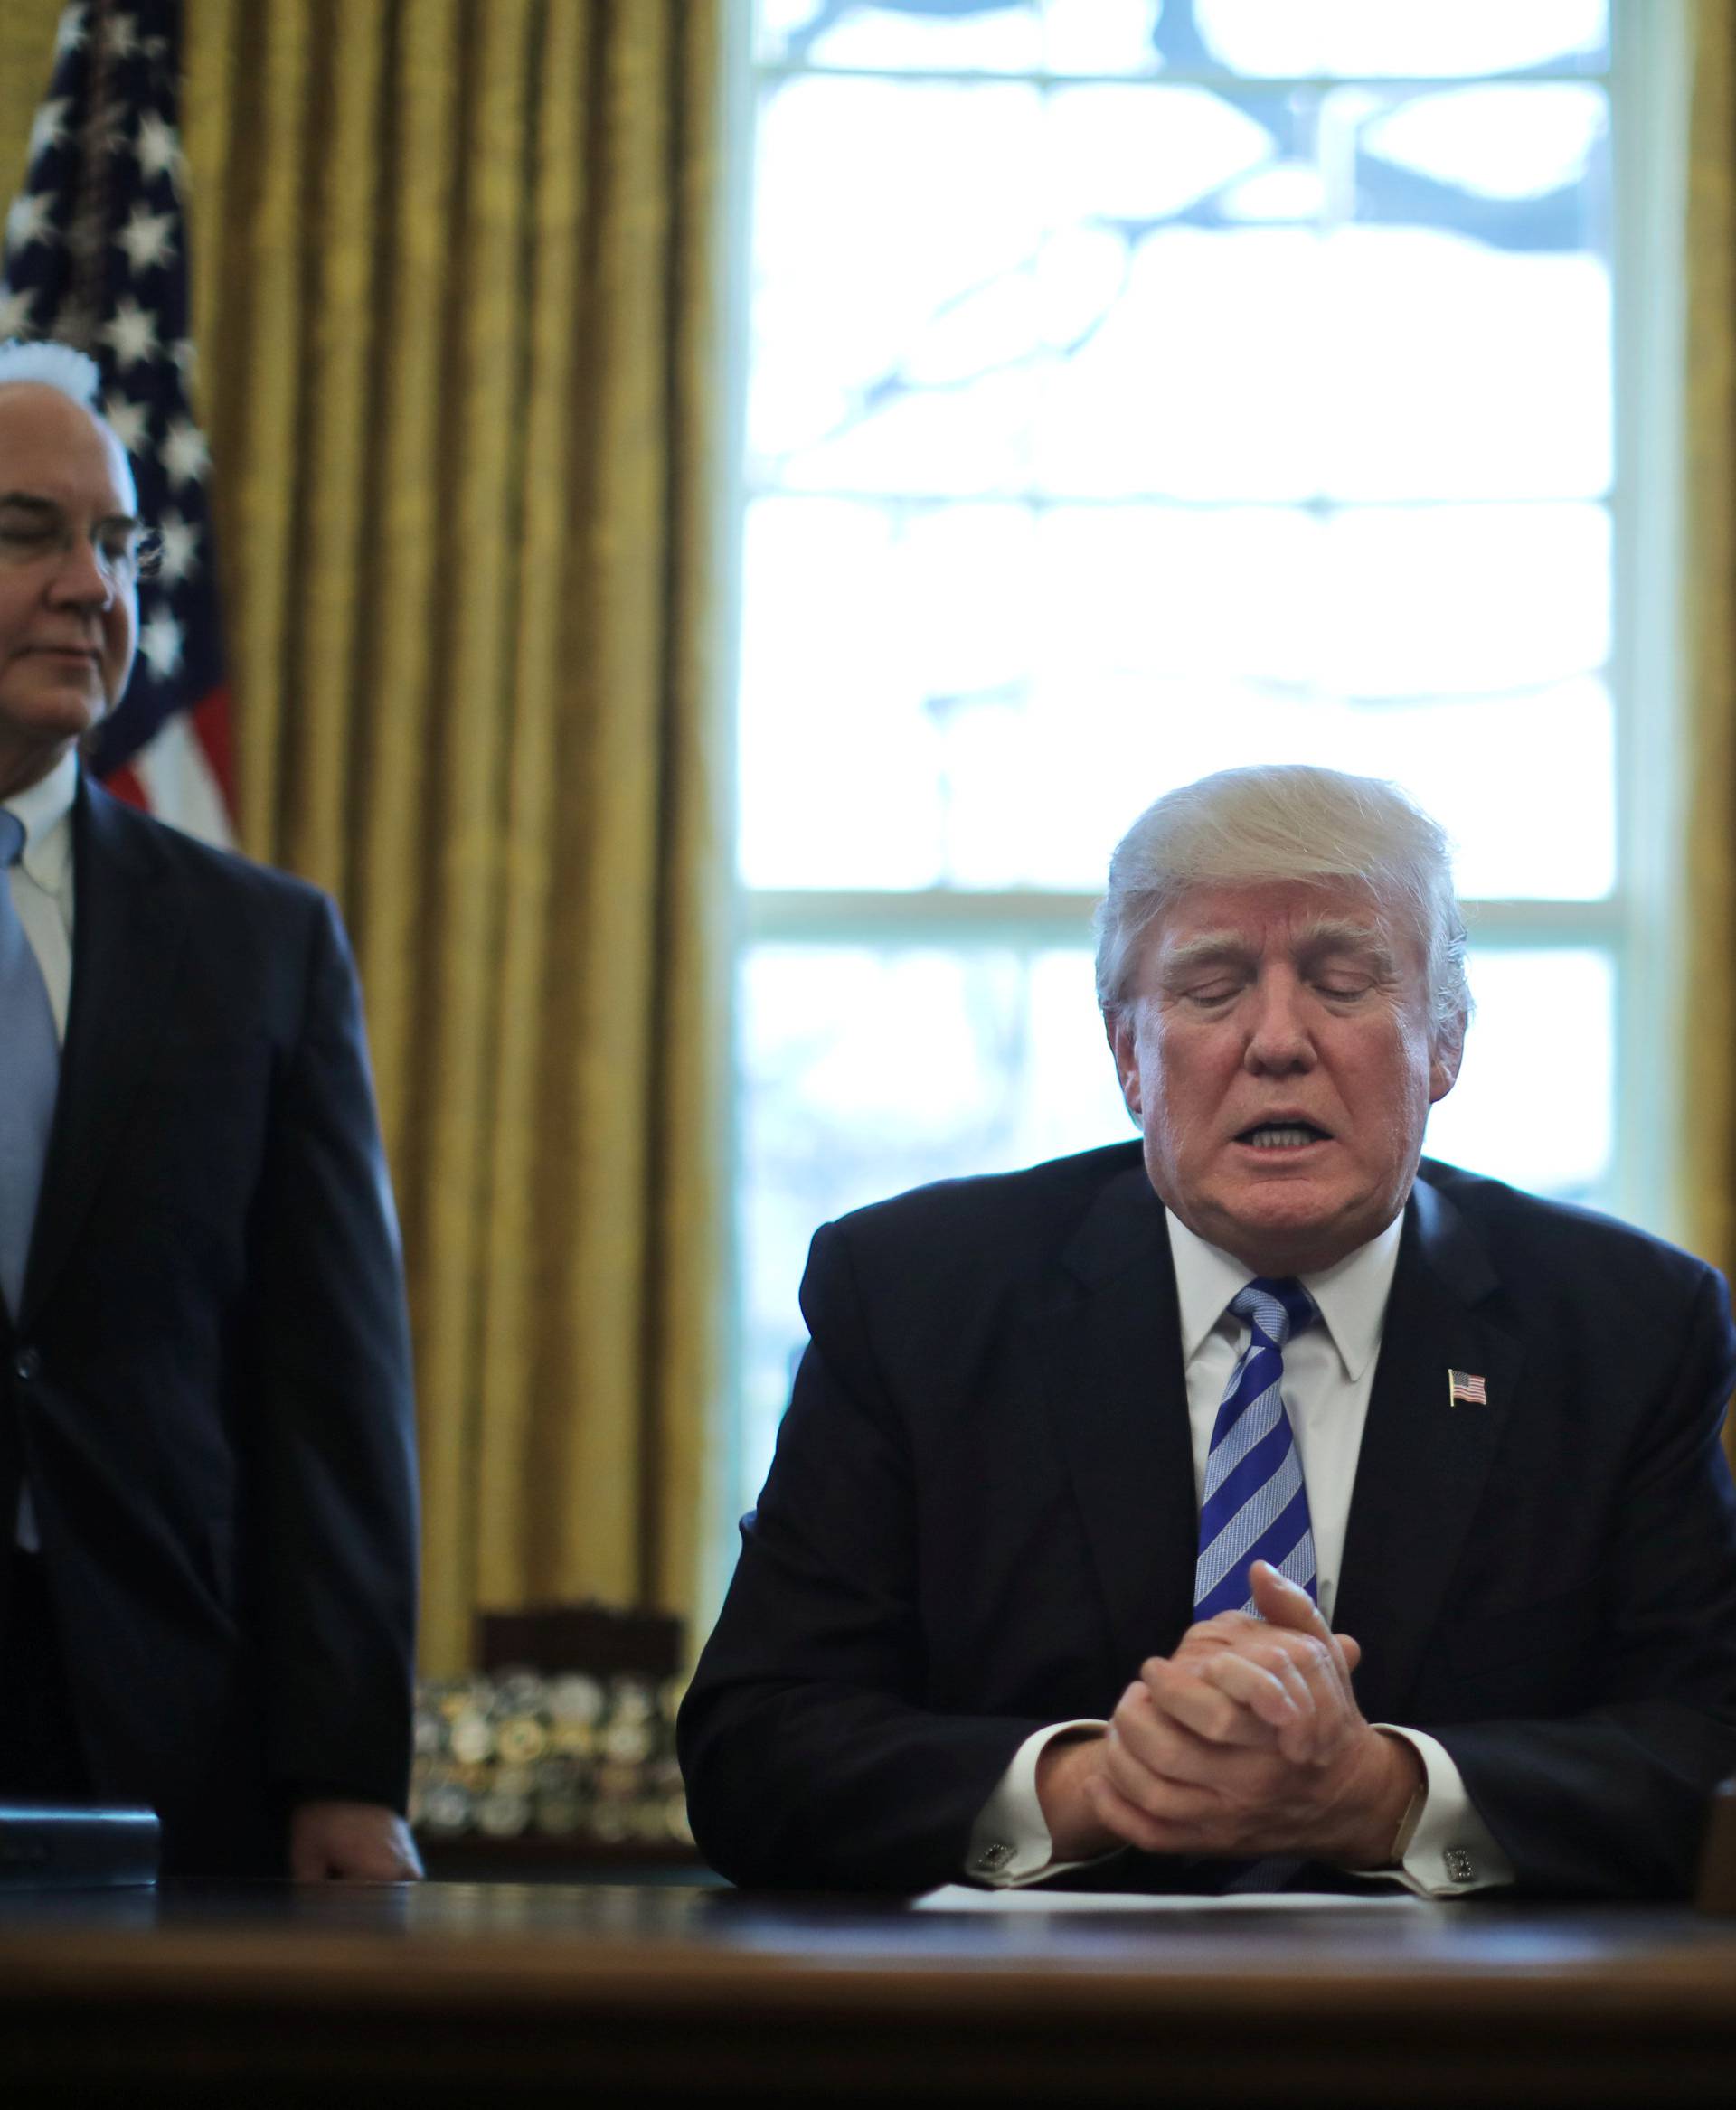 President Trump talks to journalists at the Oval Office of the White House after the AHCA health care bill was pulled before a vote, accompanied by U.S. Health and Human Services Secretary Tom Price and Vice President Mike Pence, in Washington